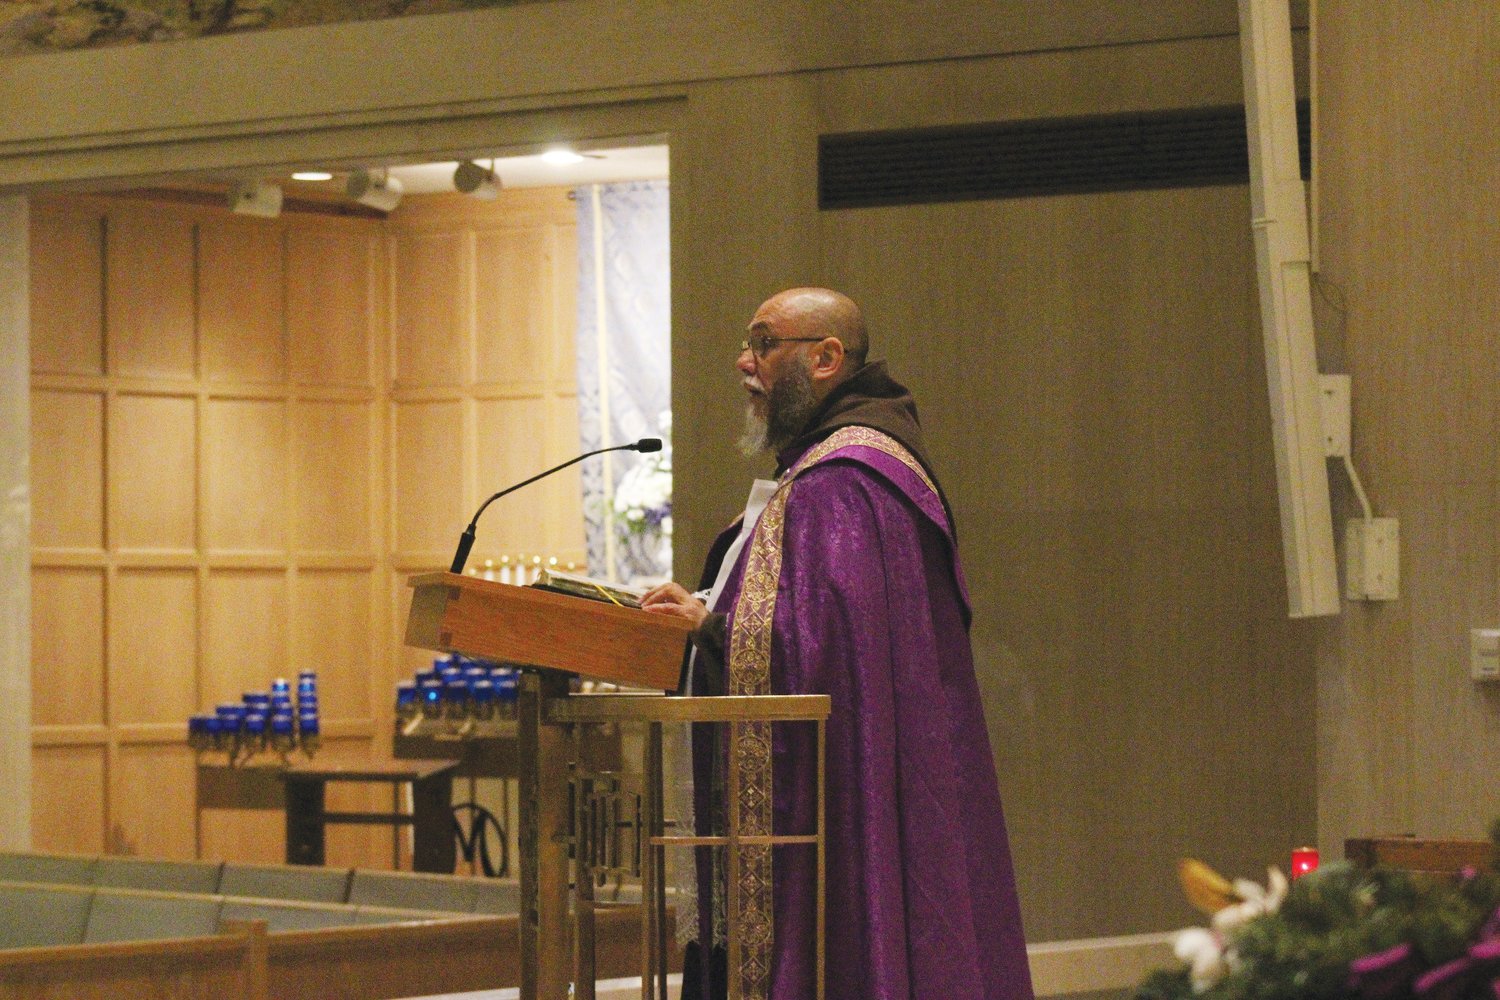 Father David Mary Engo speaks at St. Pius V Church in Providence. From December 5-7, the diocesan Eucharistic Revival hosted a Eucharistic Advent Mission offered by Father Engo, a Franciscan friar and national preacher.